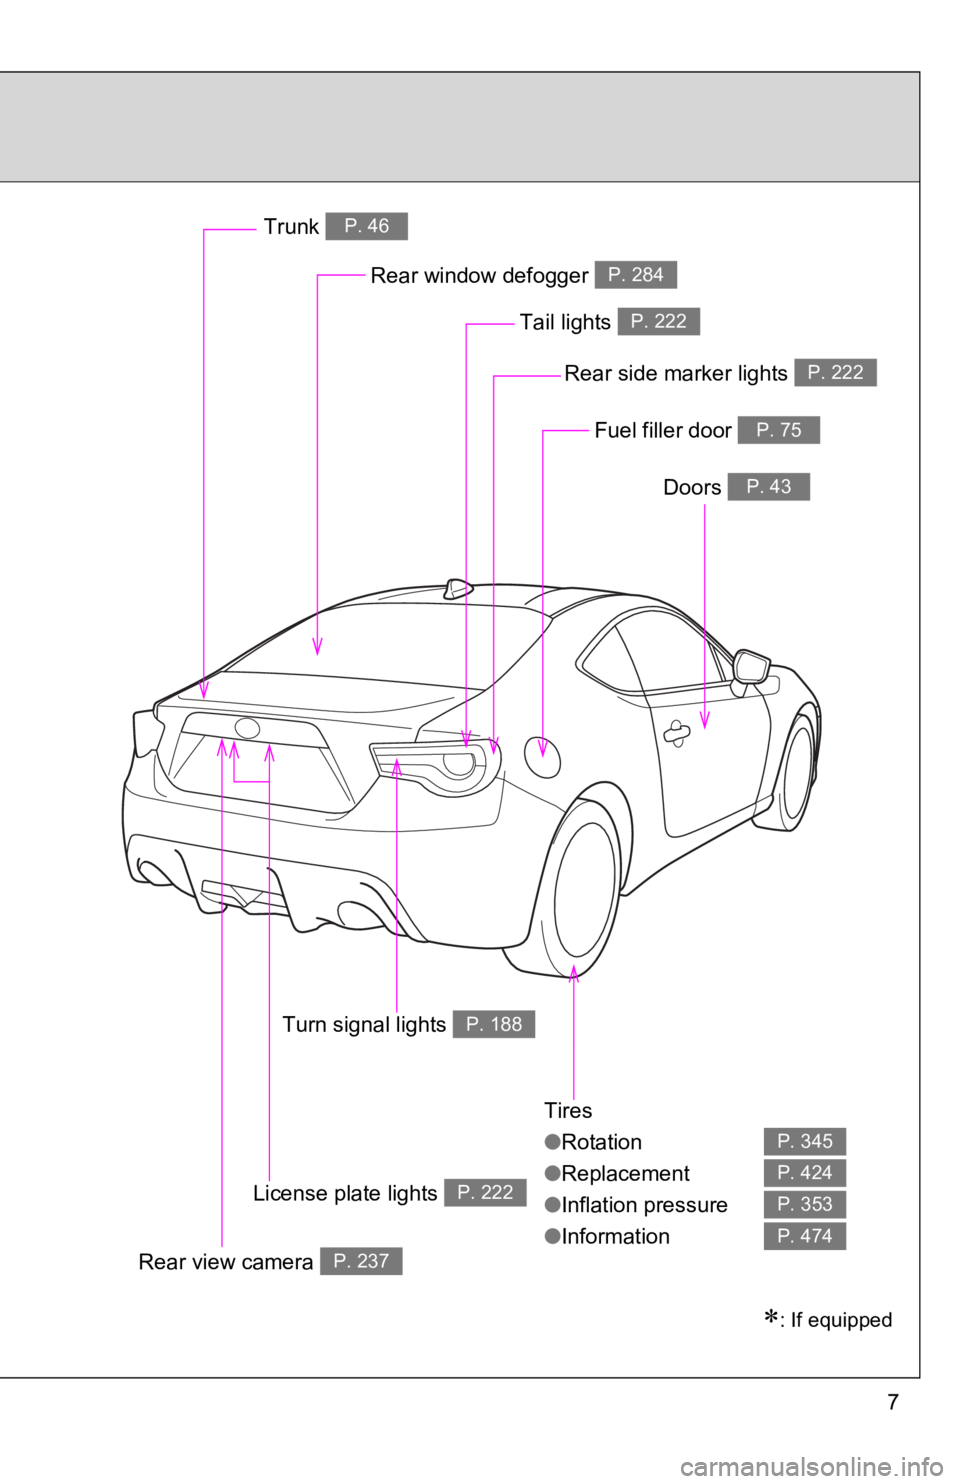 TOYOTA 86 2019  Owners Manual 7Tires
● Rotation
● Replacement
● Inflation pressure
● Information P. 345
P. 424
P. 353
P. 474Rear window defogger  P. 284
Trunk  P. 46
Doors  P. 43
Fuel filler door  P. 75
Tail lights  P. 222